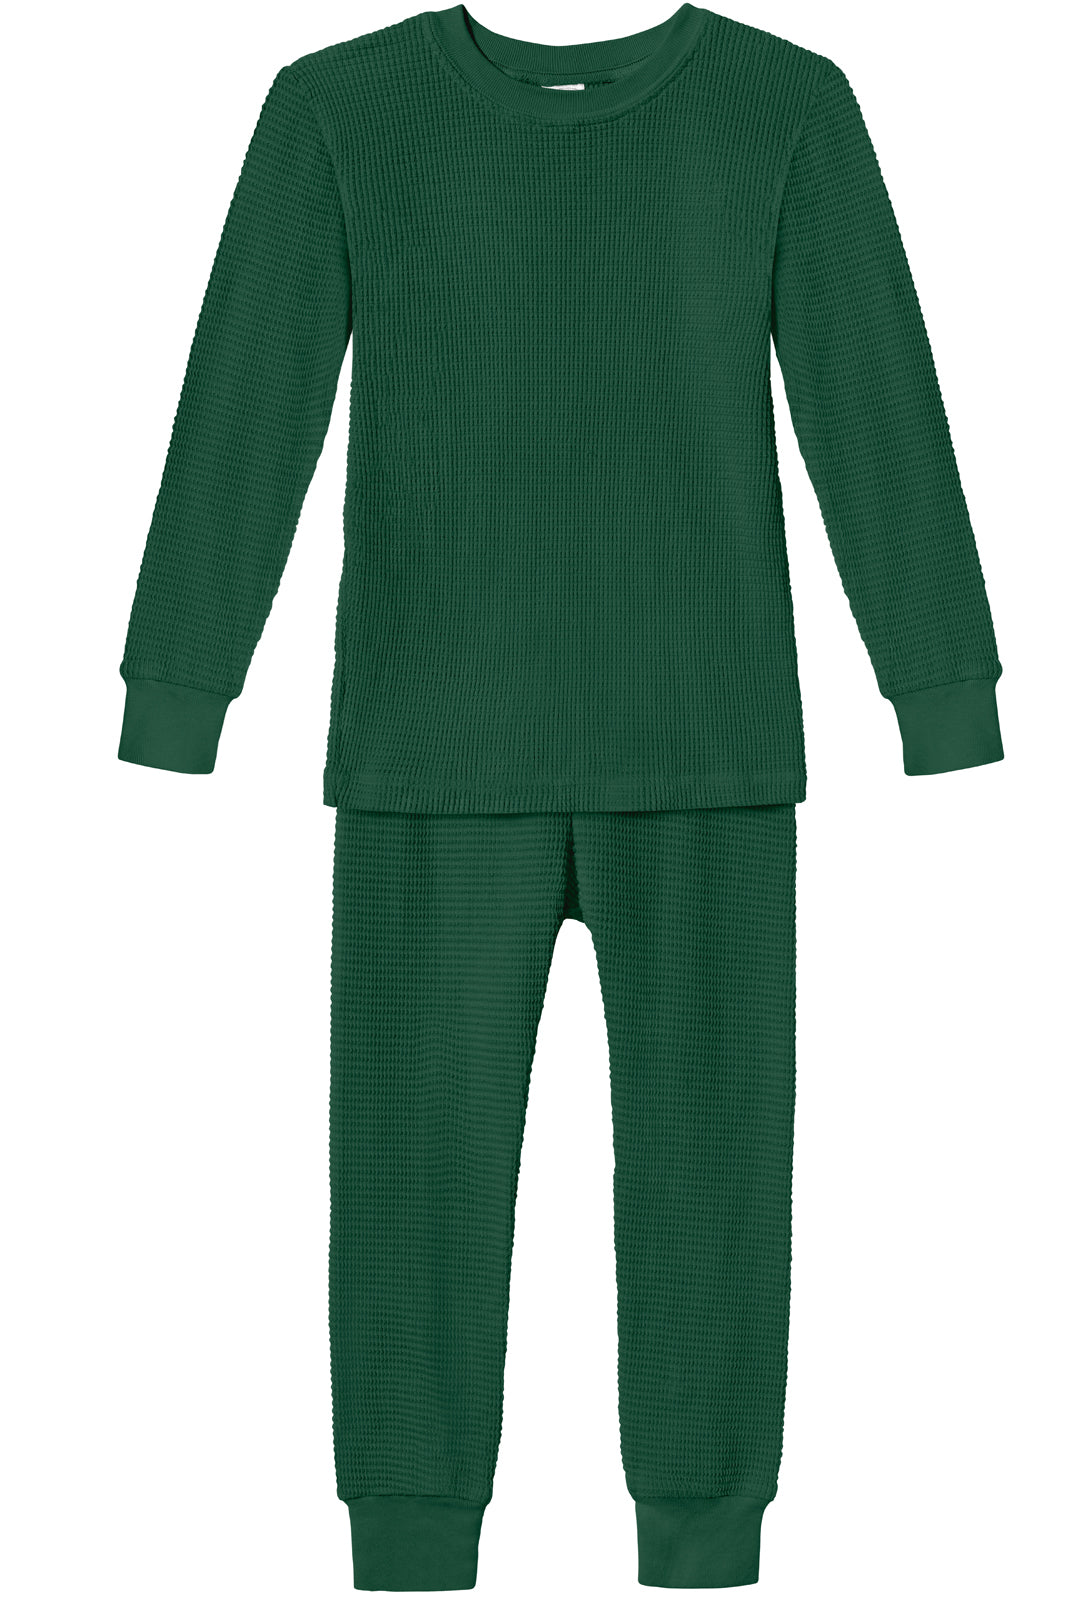 Baby Boys' Thermal Underwear - 4 Piece Waffle Knit Top and Long Johns  (12M-4T)